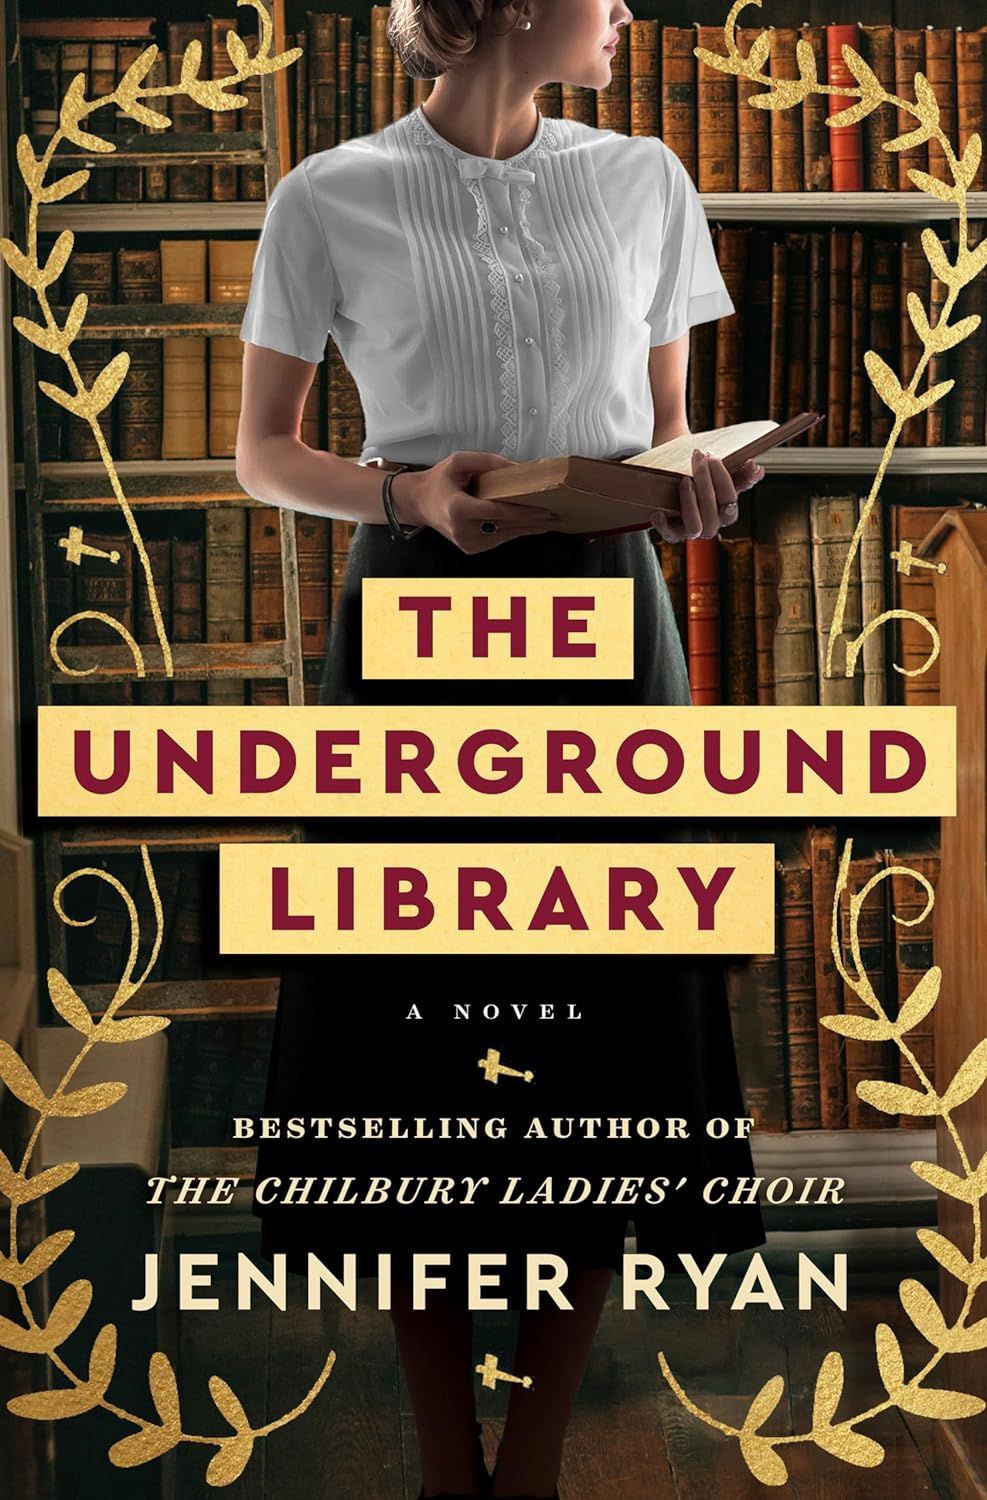 The Underground Library book cover